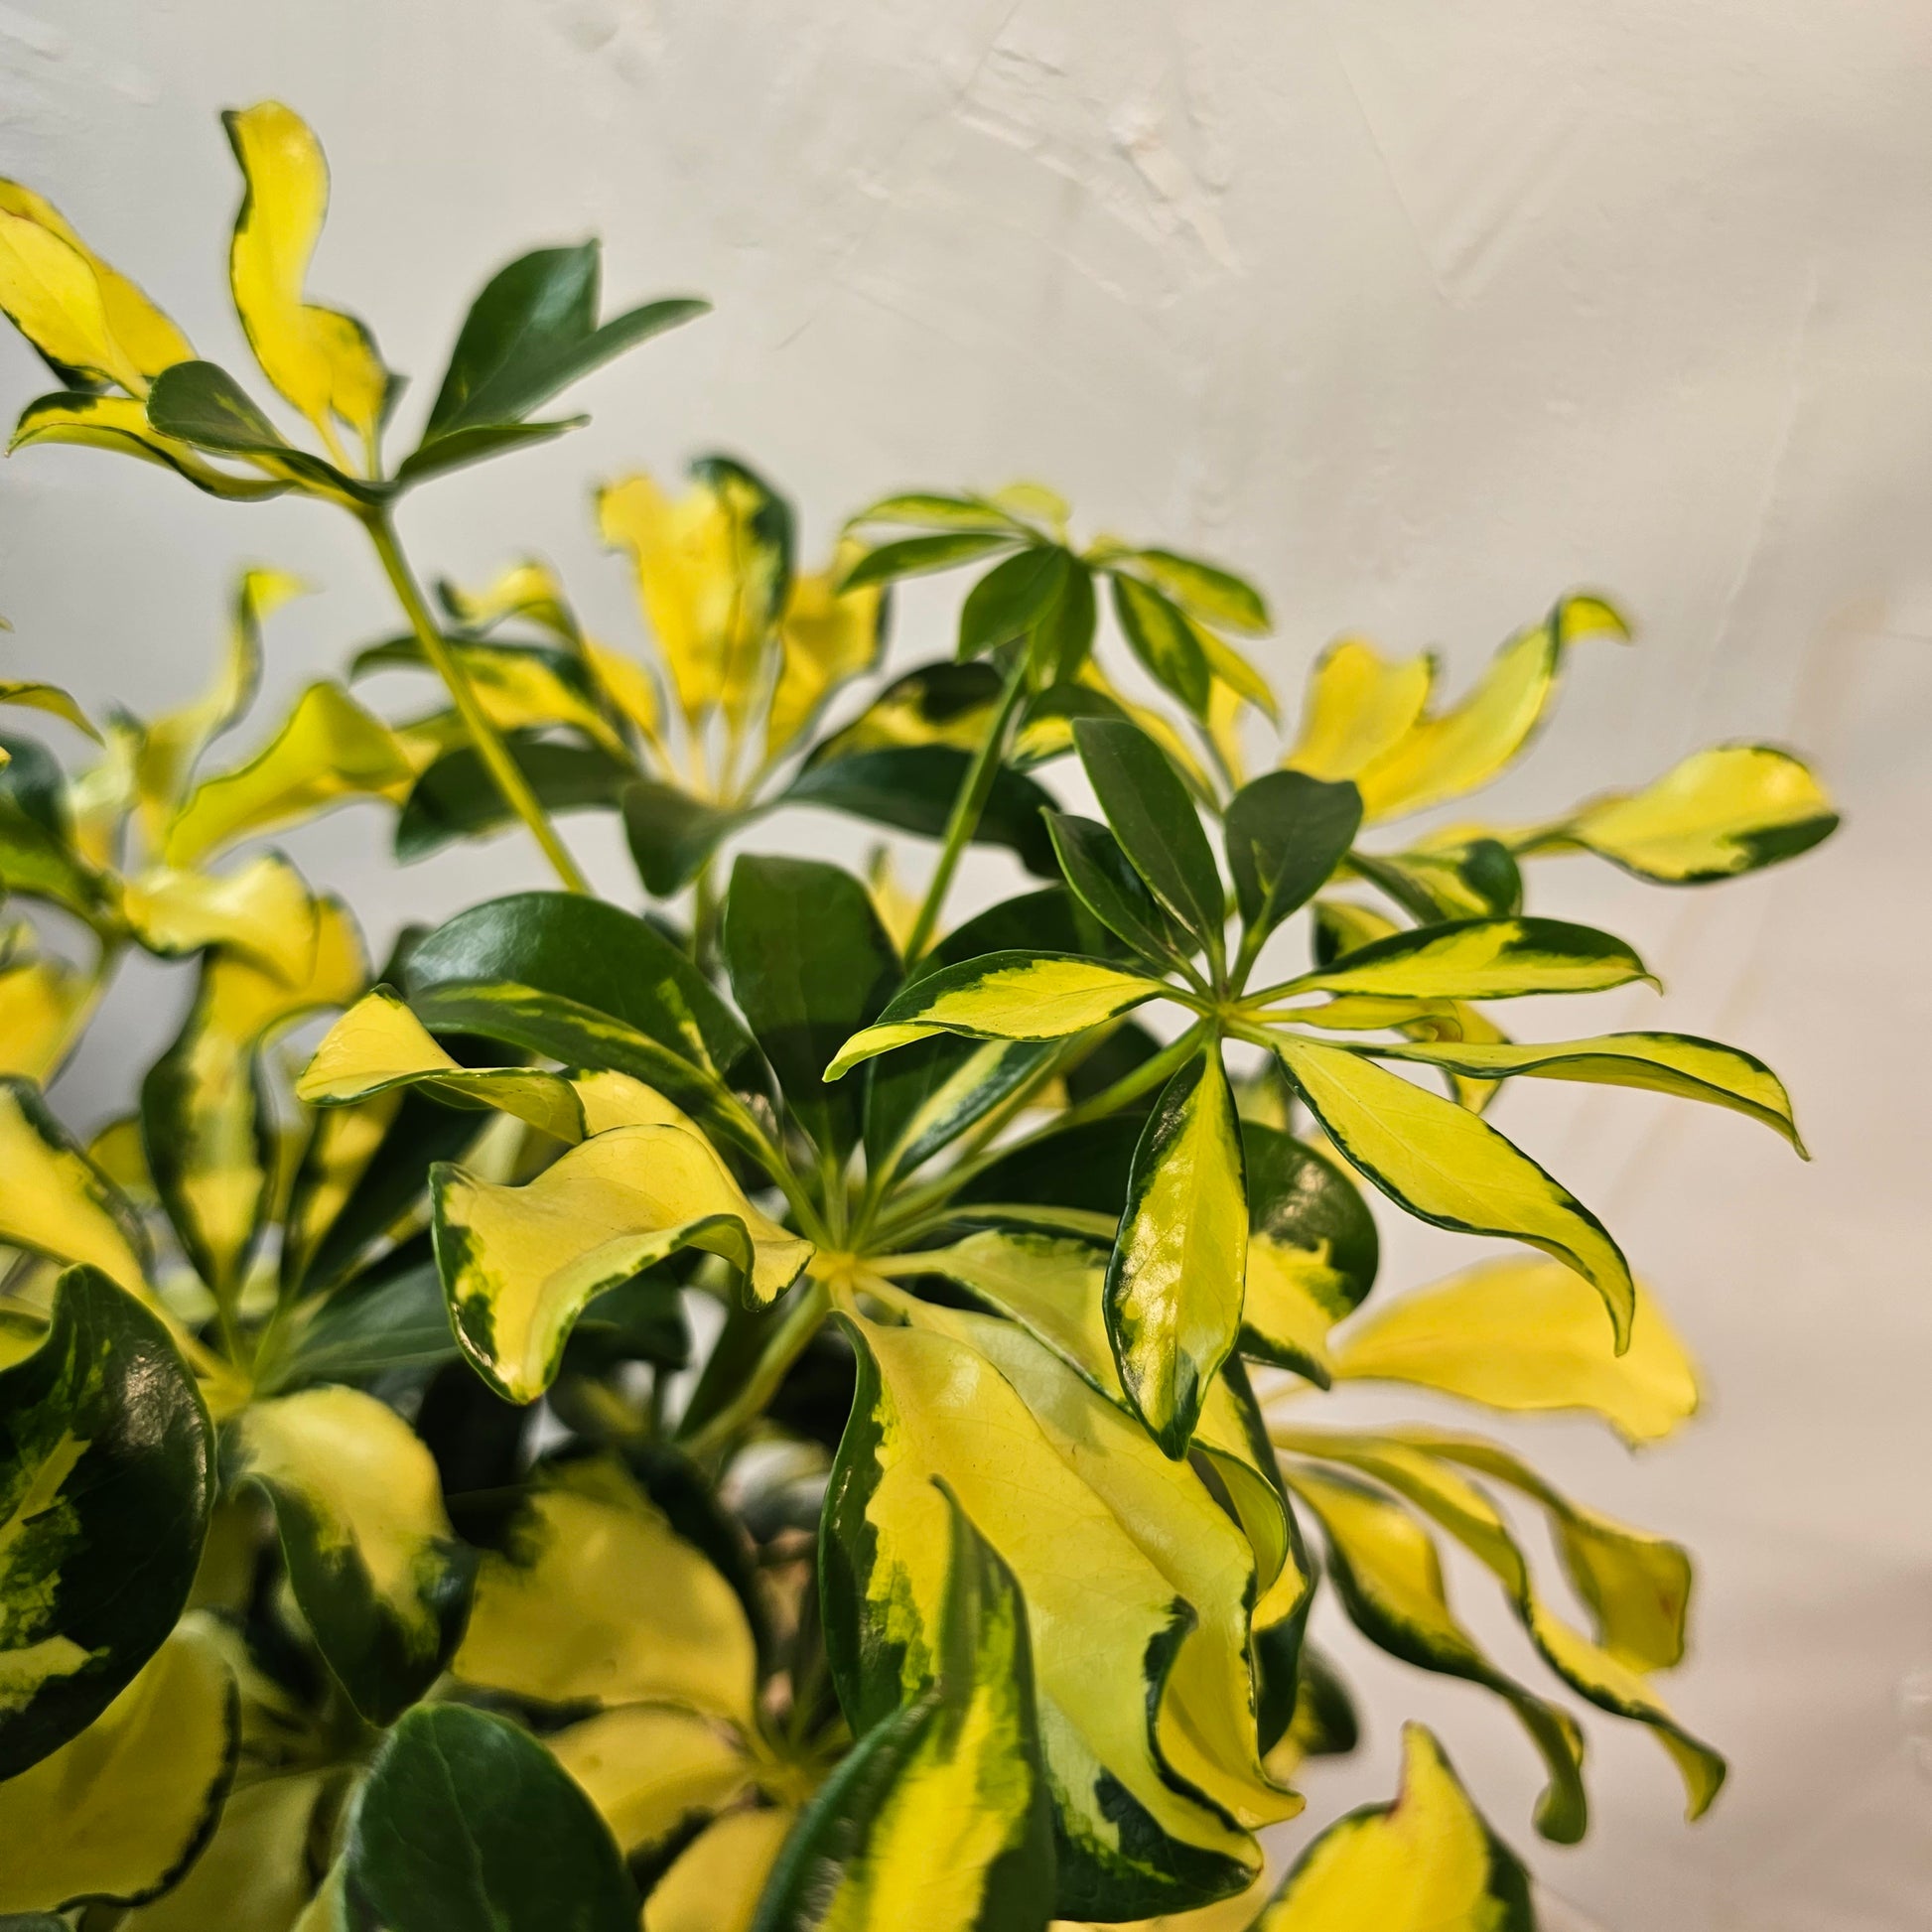 Variegated Umbrella Tree Bush (Schefflera arboricola "Trinette") in a 10 inch pot. Indoor plant for sale by Promise Supply for delivery and pickup in Toronto